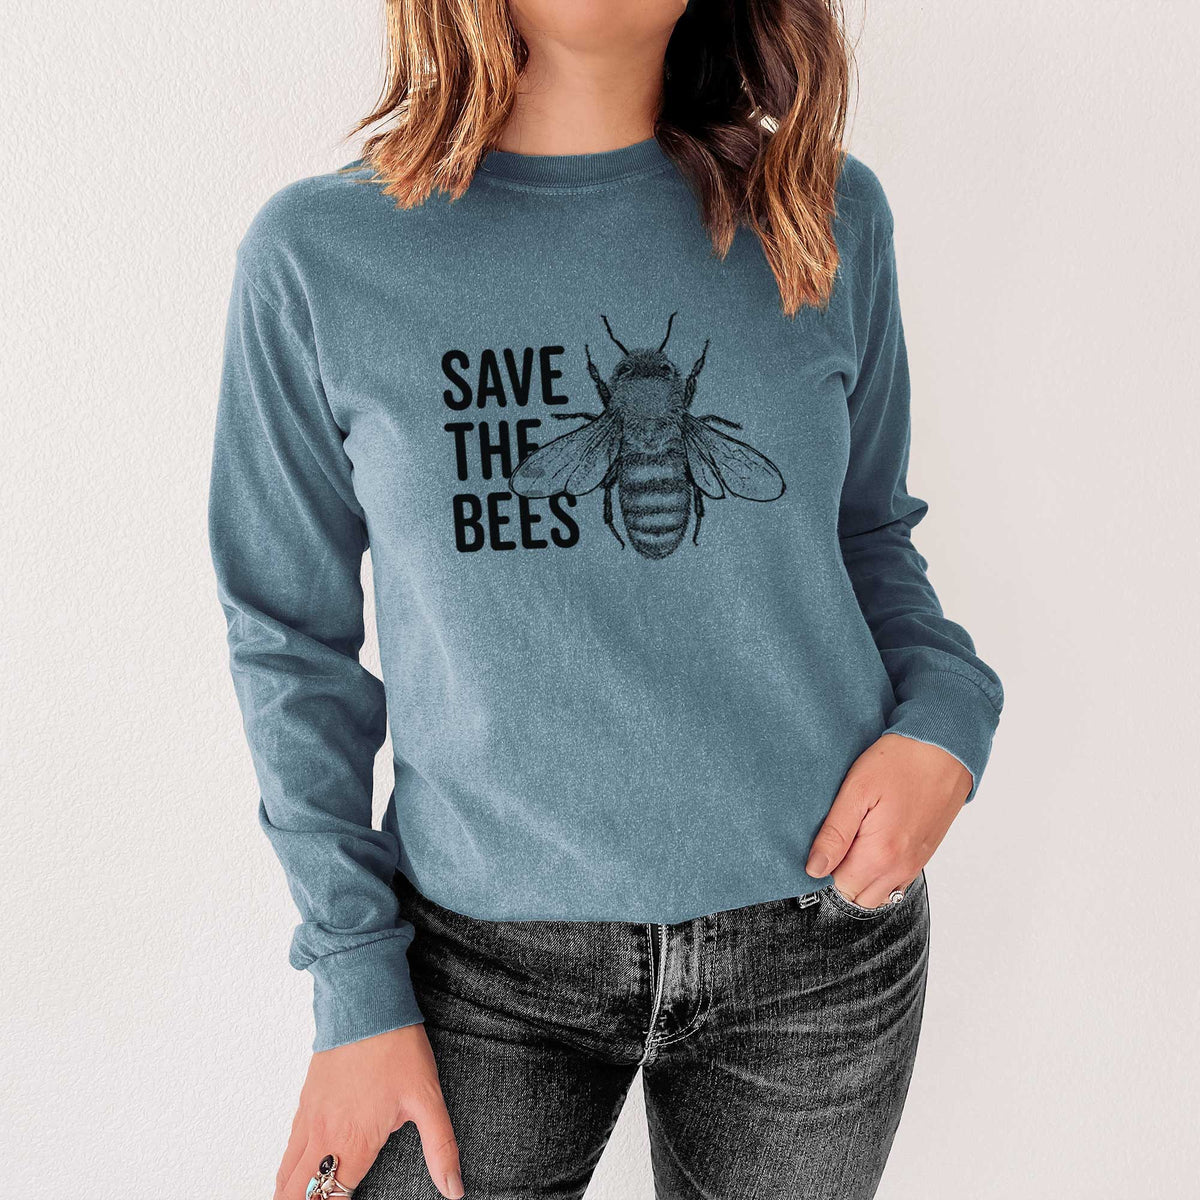 Save the Bees - Heavyweight 100% Cotton Long Sleeve